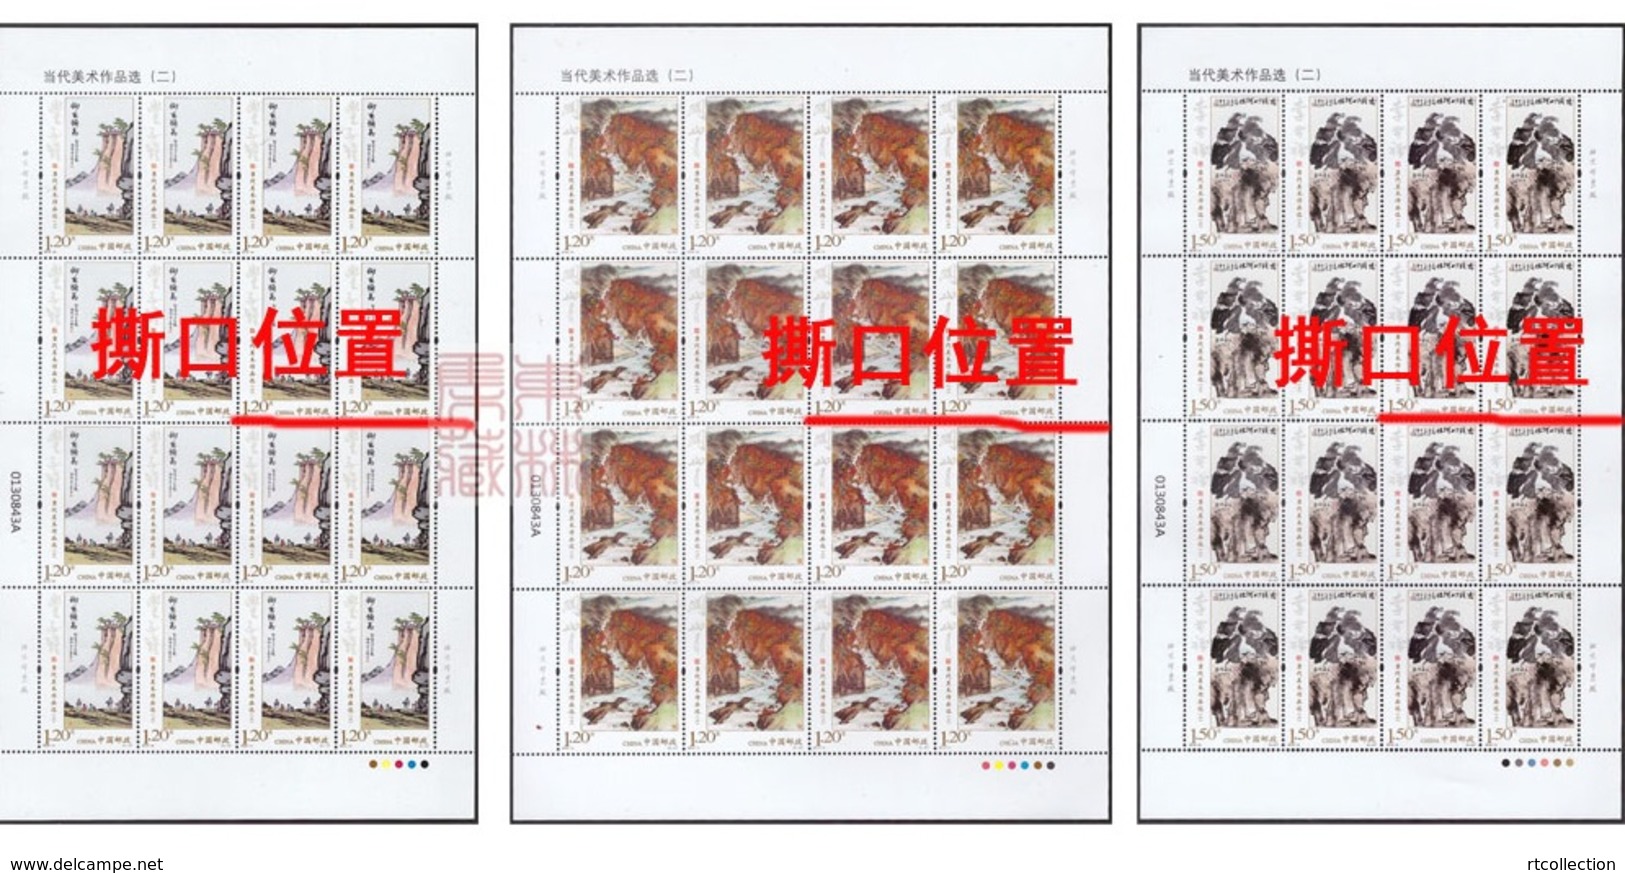 China 2018 Cut Sheet Paintings Chinese Contemporary Works Art II Mountain River Birds Of Prey Eagle Stamps MNH 2018-10 - Eagles & Birds Of Prey